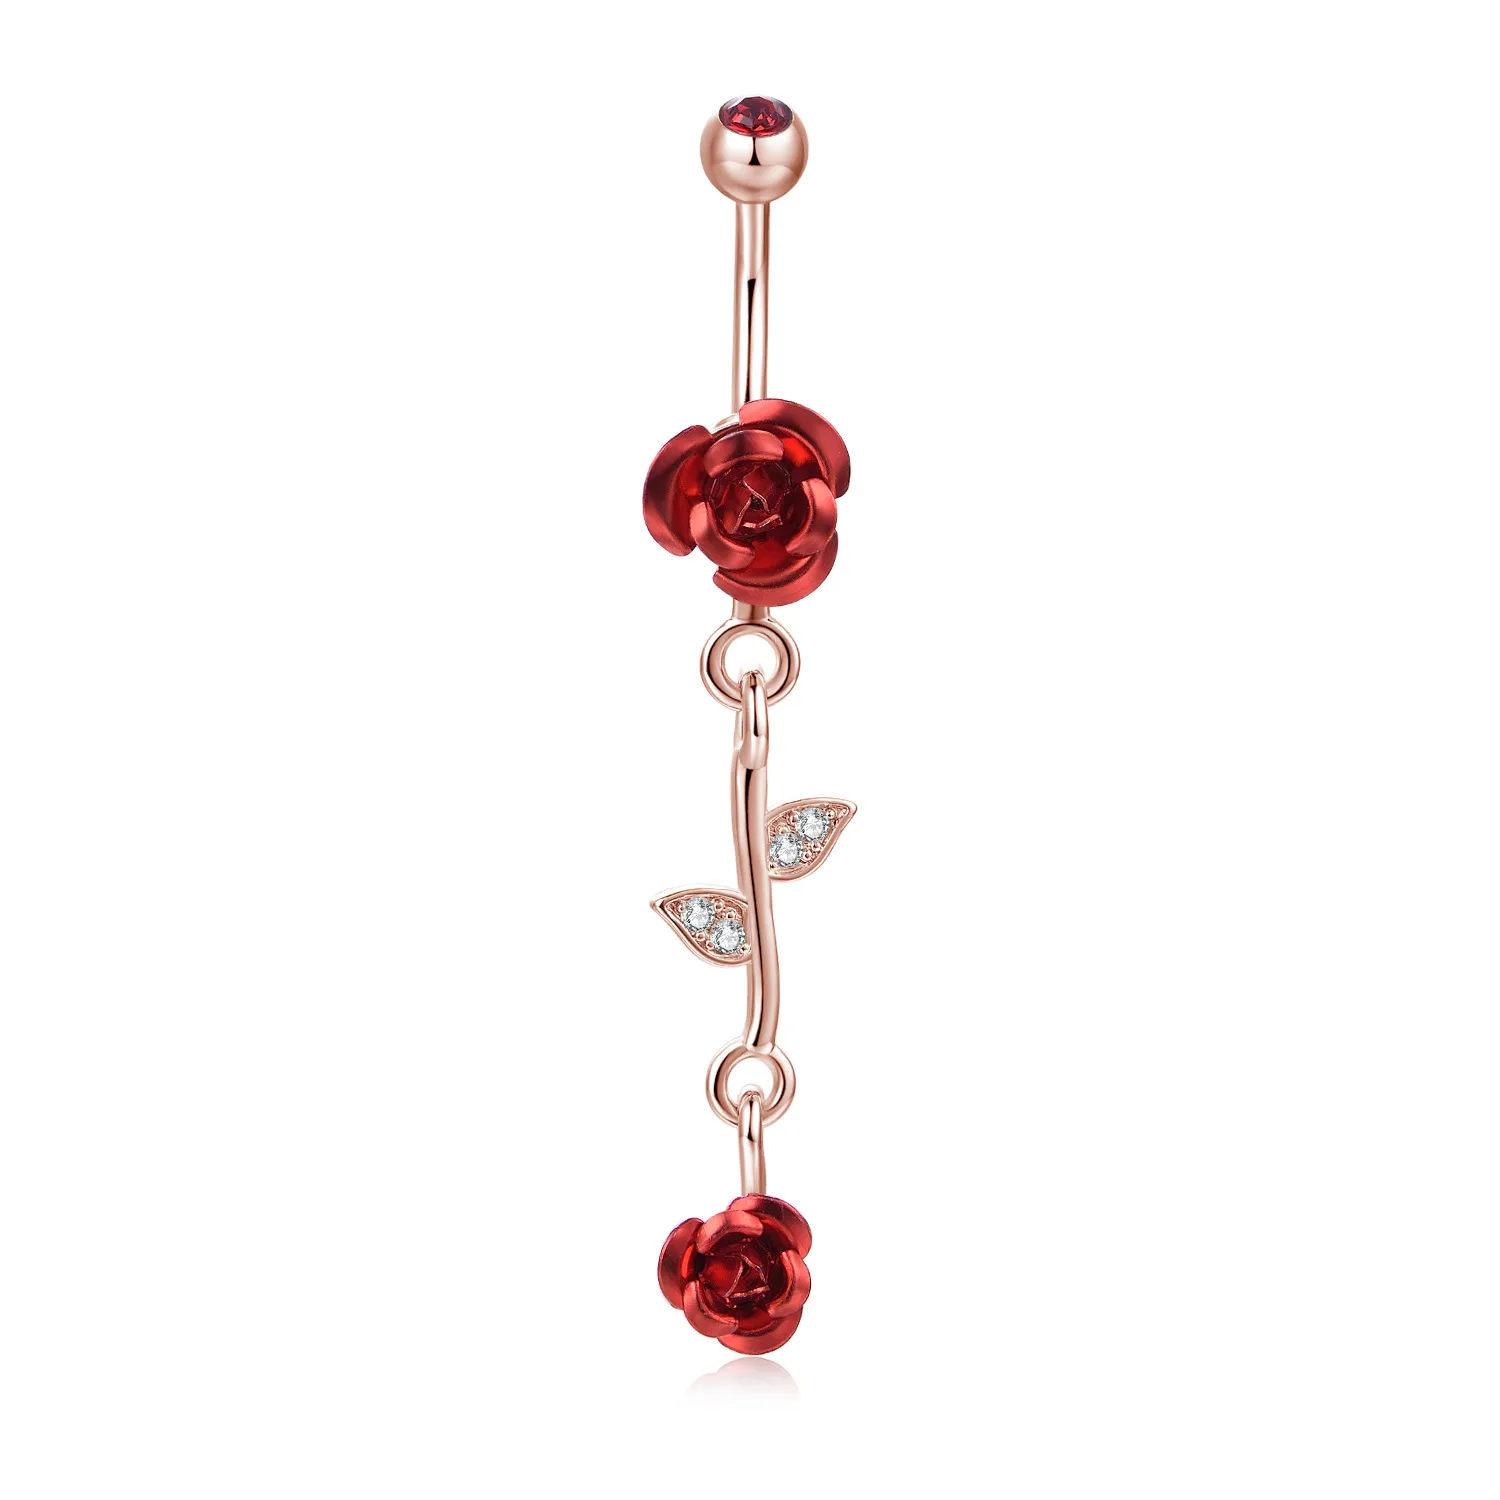 Belly Piercing, Belly Bars, Navel Piercing Jewellery, Belly Button Rings